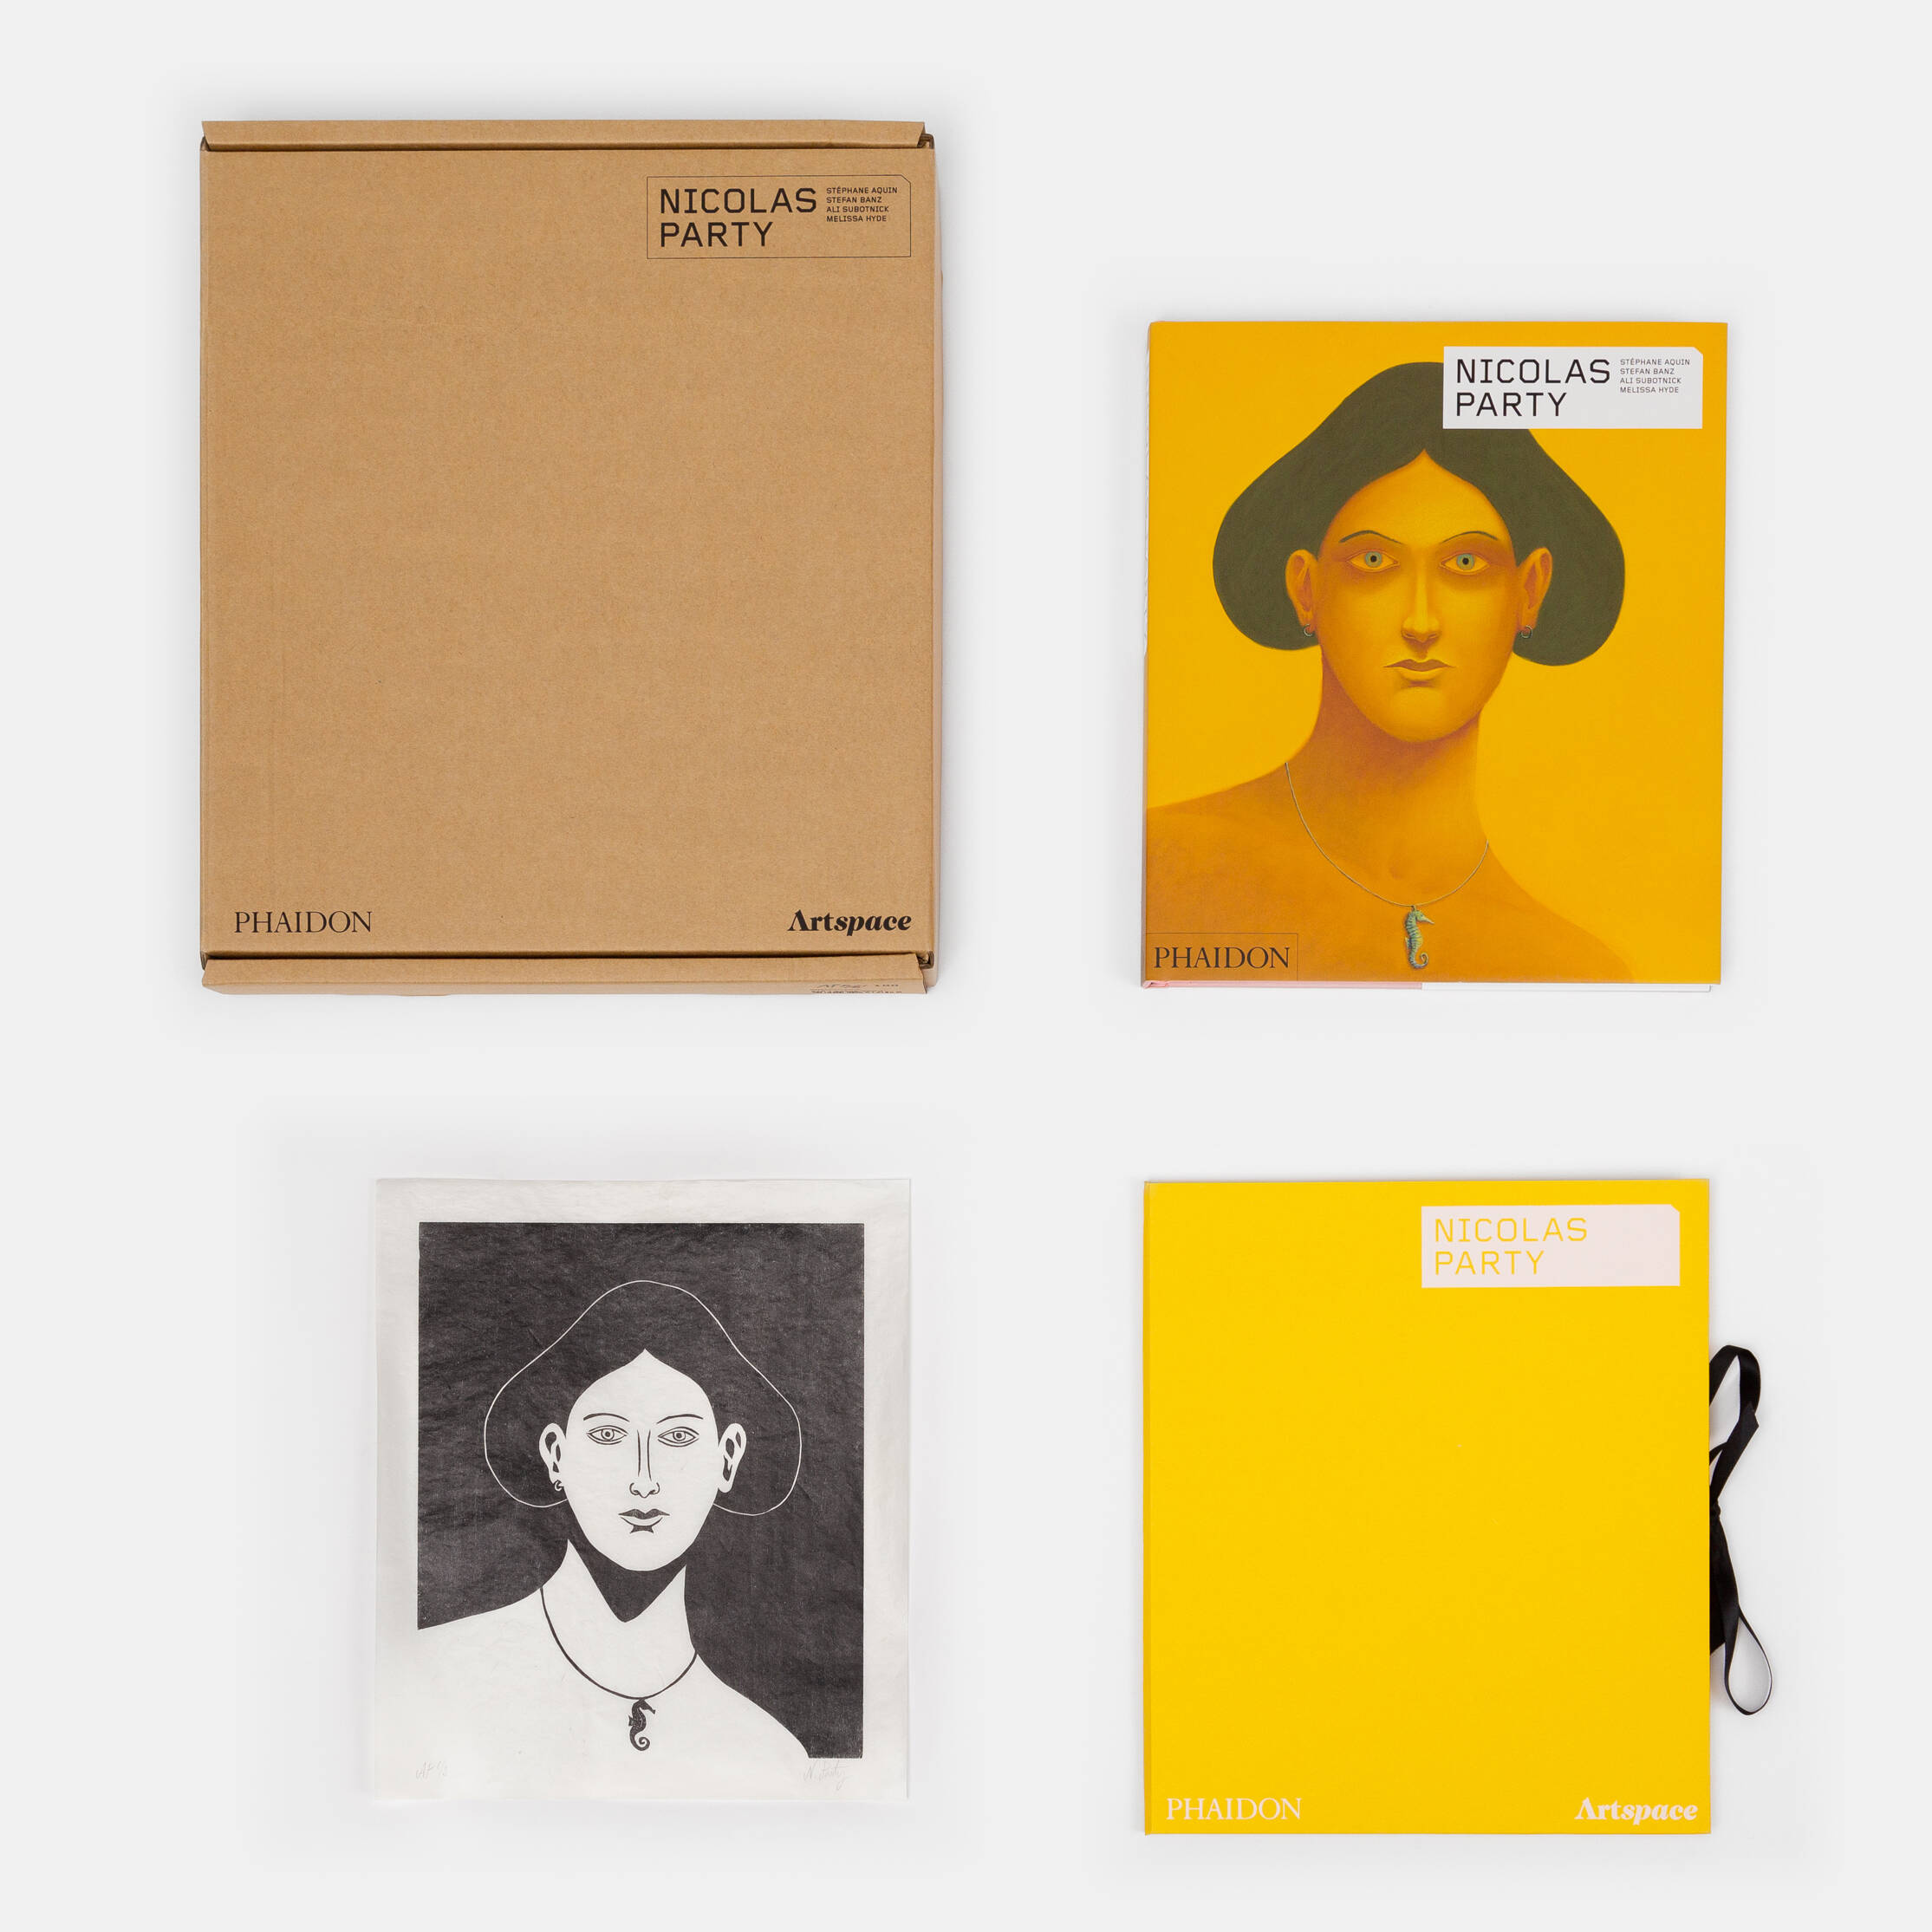 Nicolas Party releases new Phaidon and Artspace edition